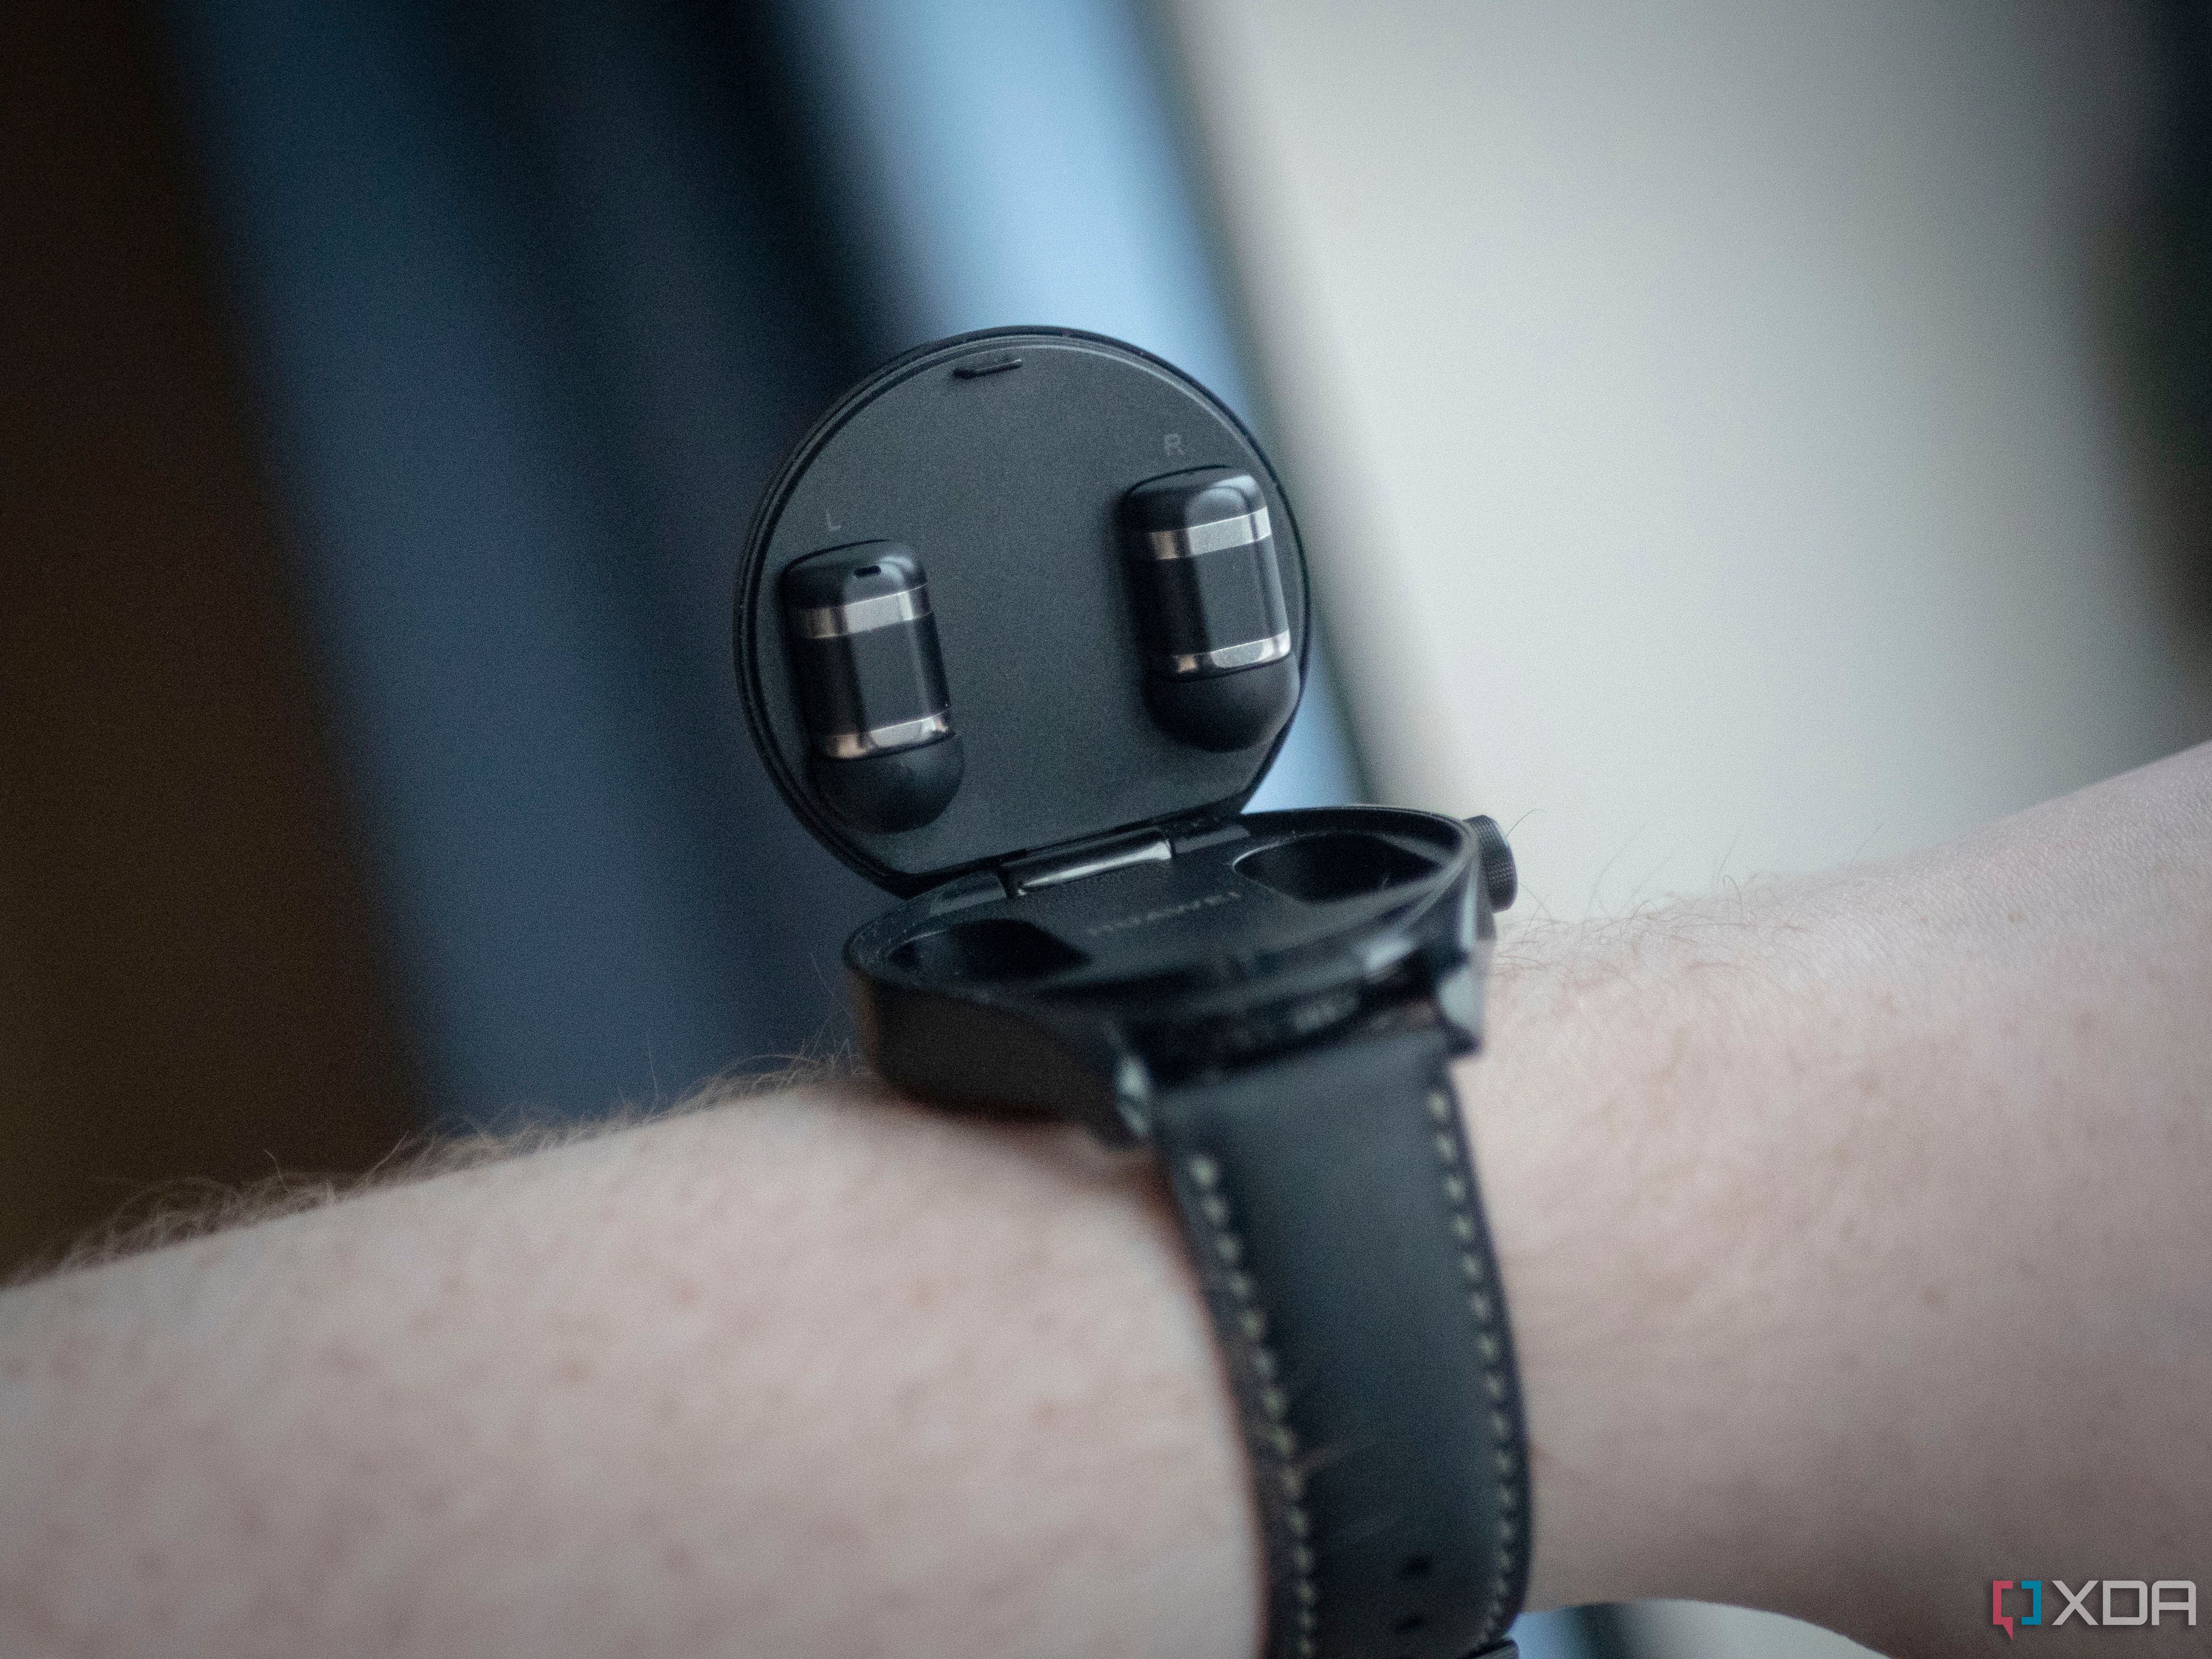 Huawei's Watch Buds ask: “What if your smartwatch also contained